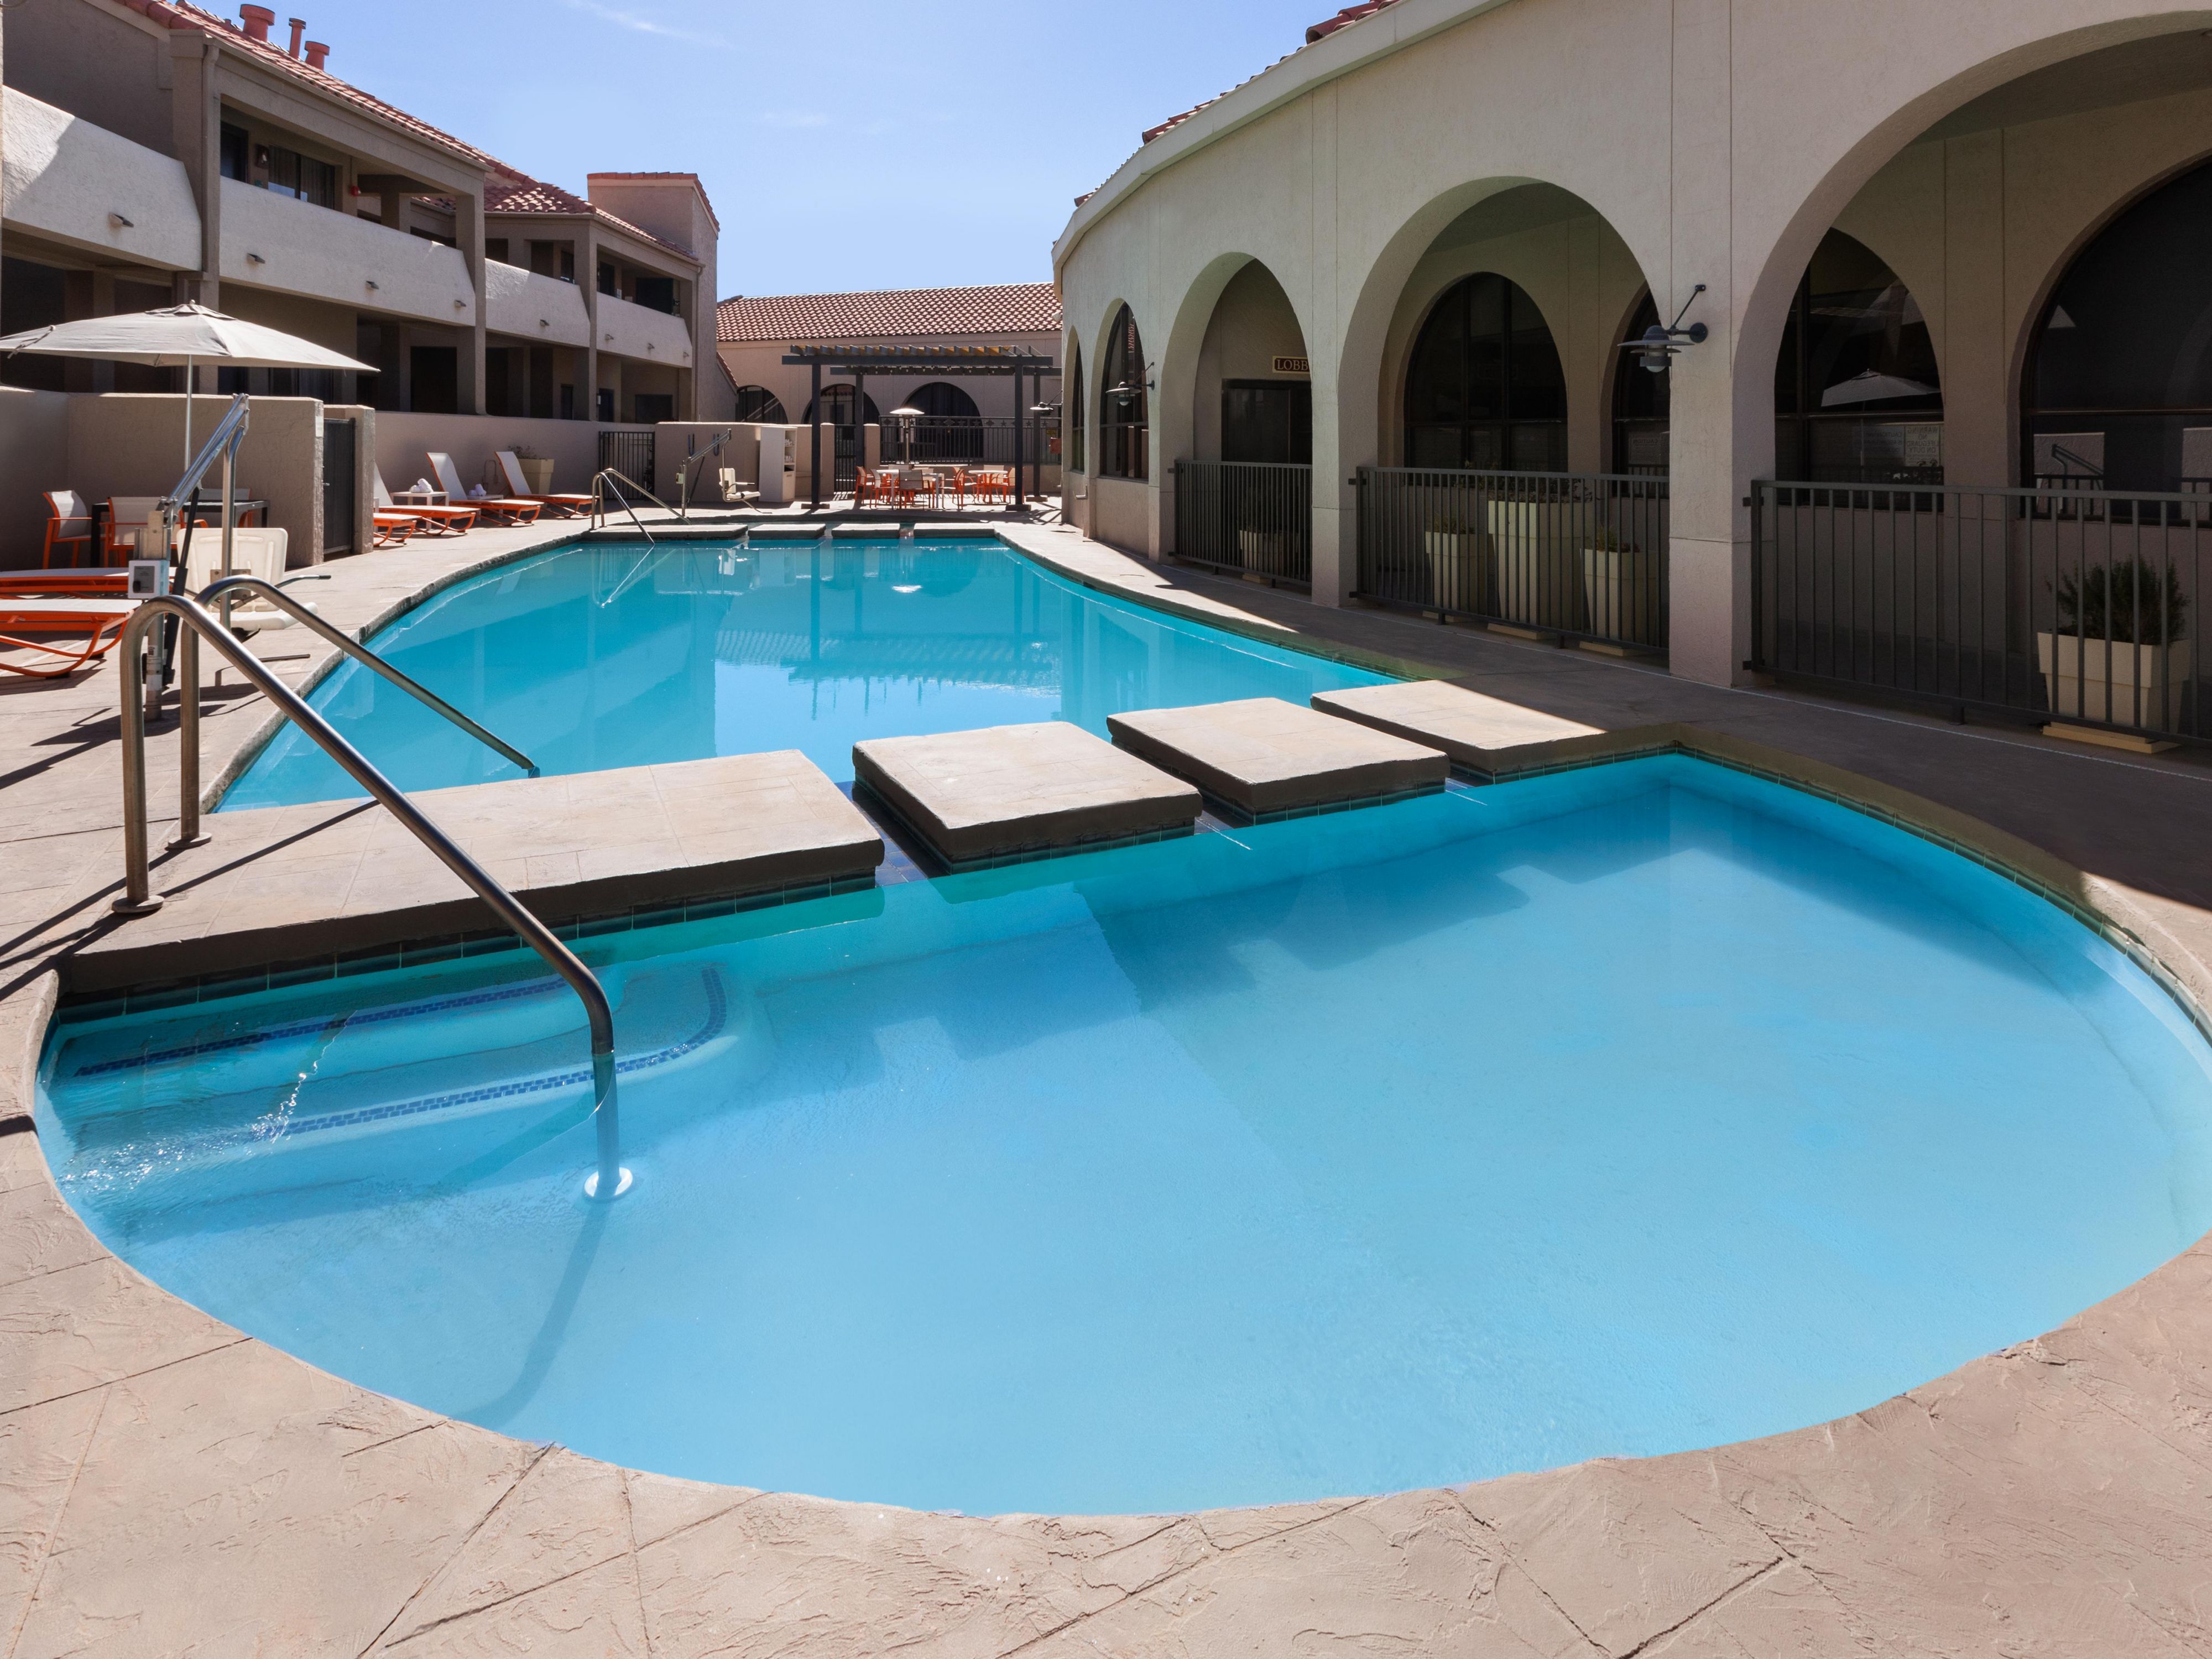 Cool down and take a dip in our refreshing outdoor pool, equipped with comfortable poolside seating. Enjoy some rest and relaxation during your stay.